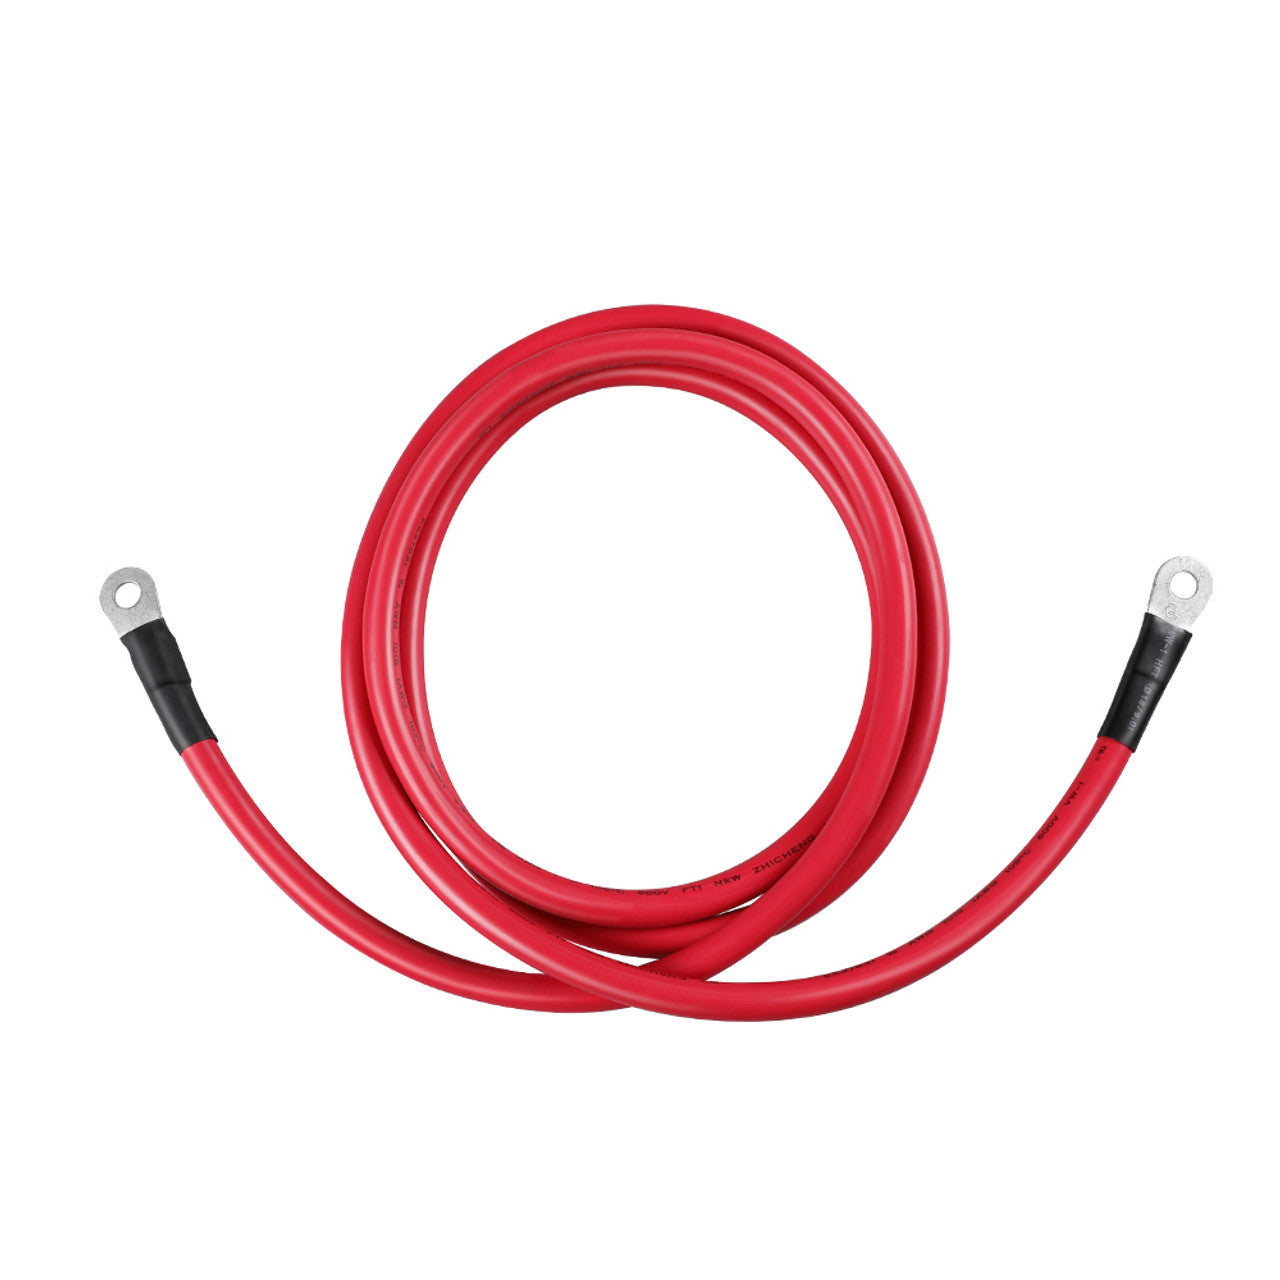 Battery Inverter Cables for 3/8 in Lugs